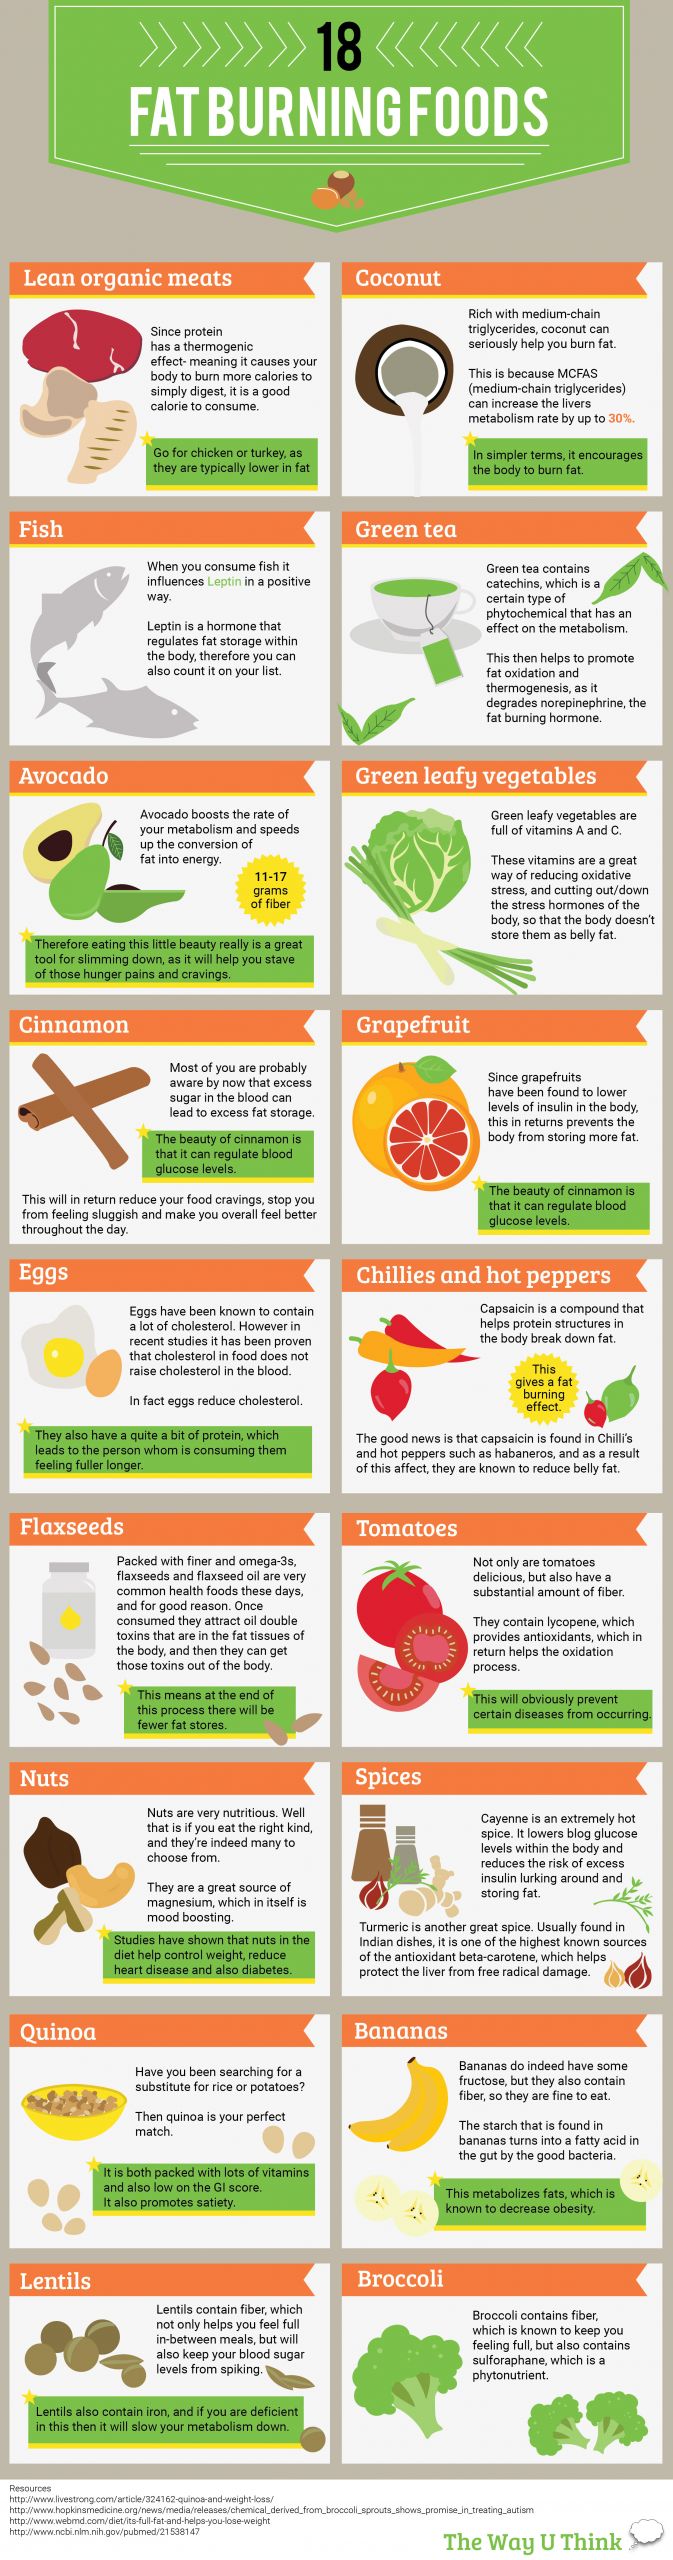 Fat Burning Foods Meals
 Infographic 18 Fat Burning Foods For Health Conscious